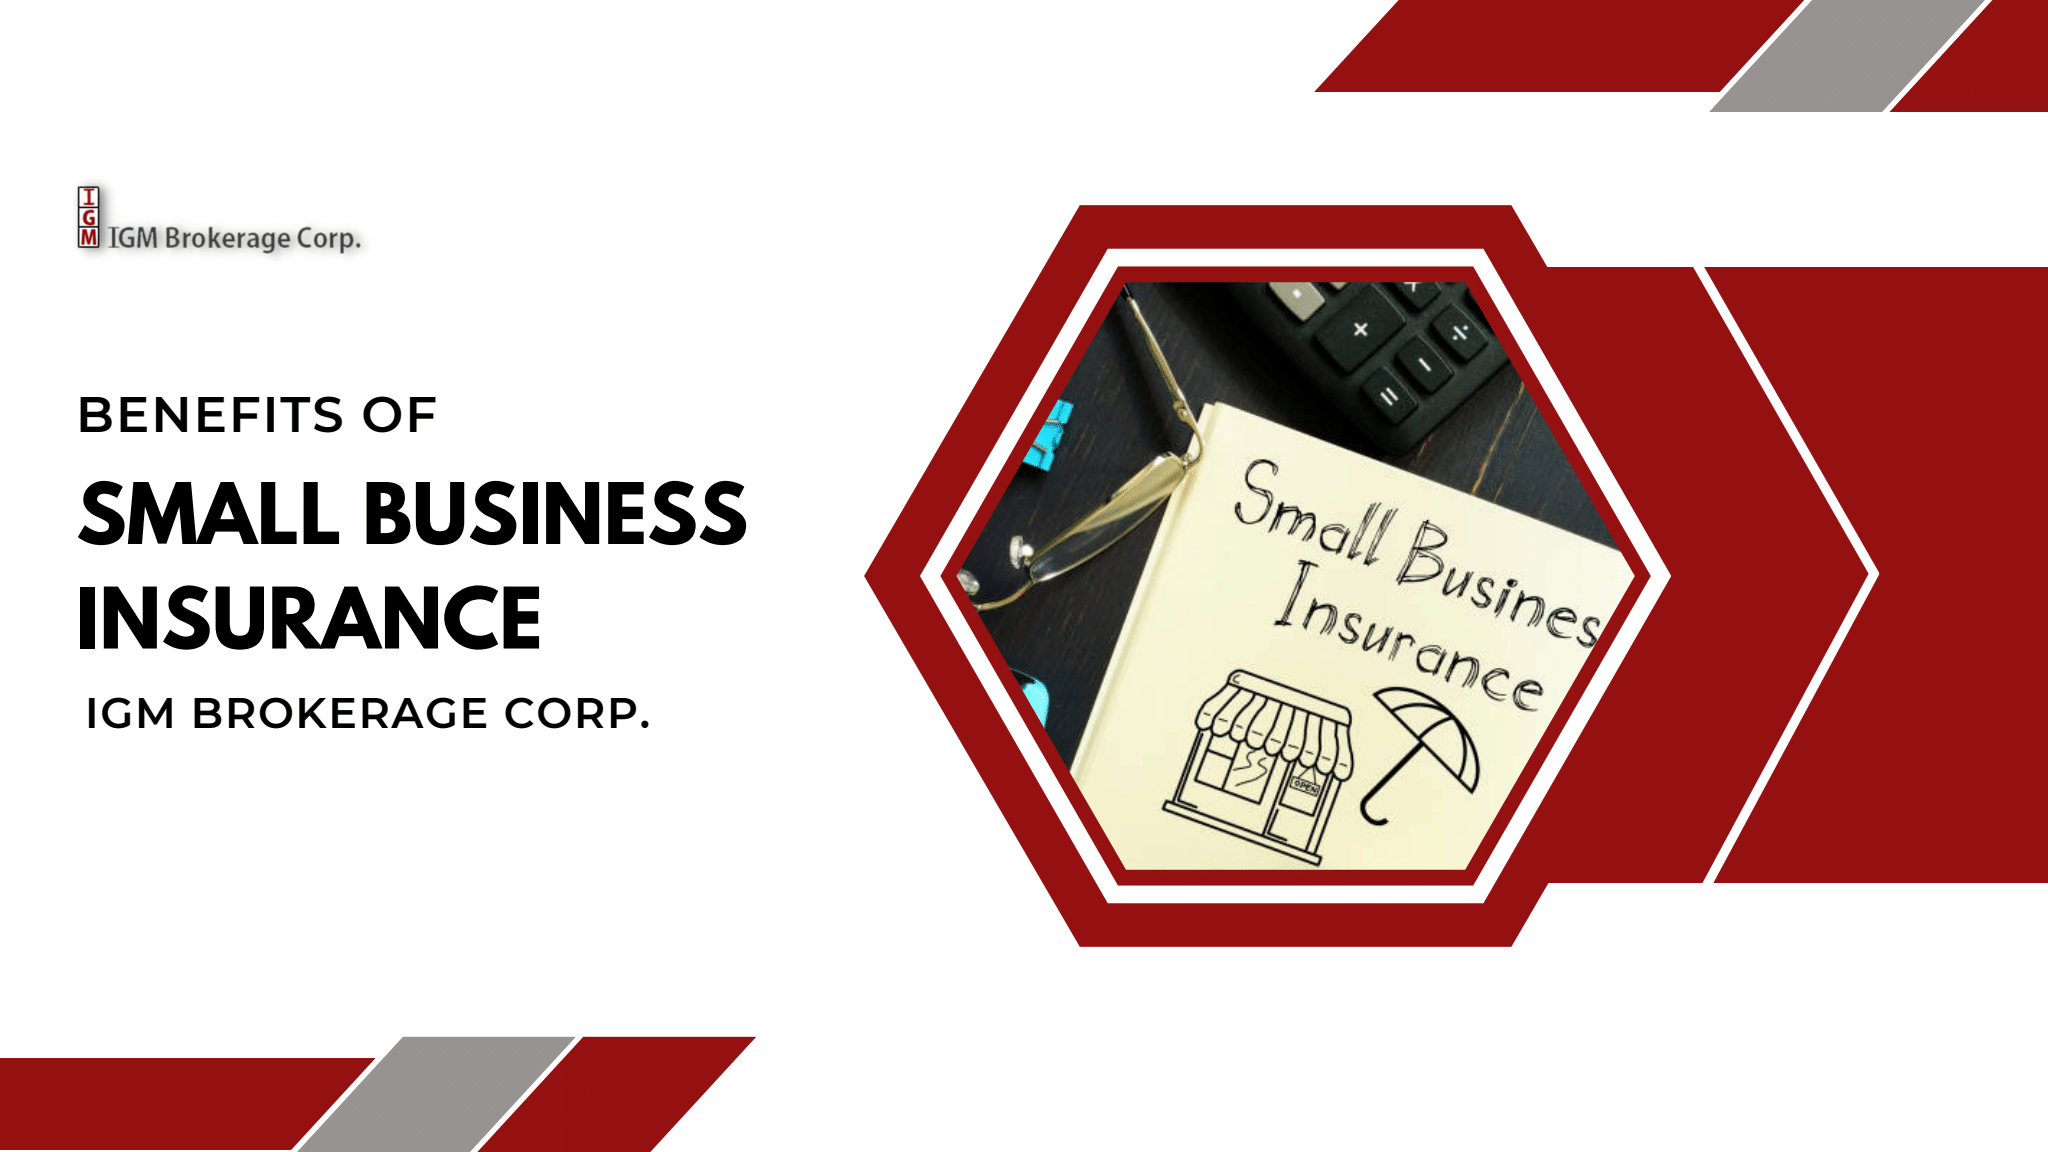 Dropbox - The Benefits of Small Business Insurance Manhattan NY.pdf - Simplify your life